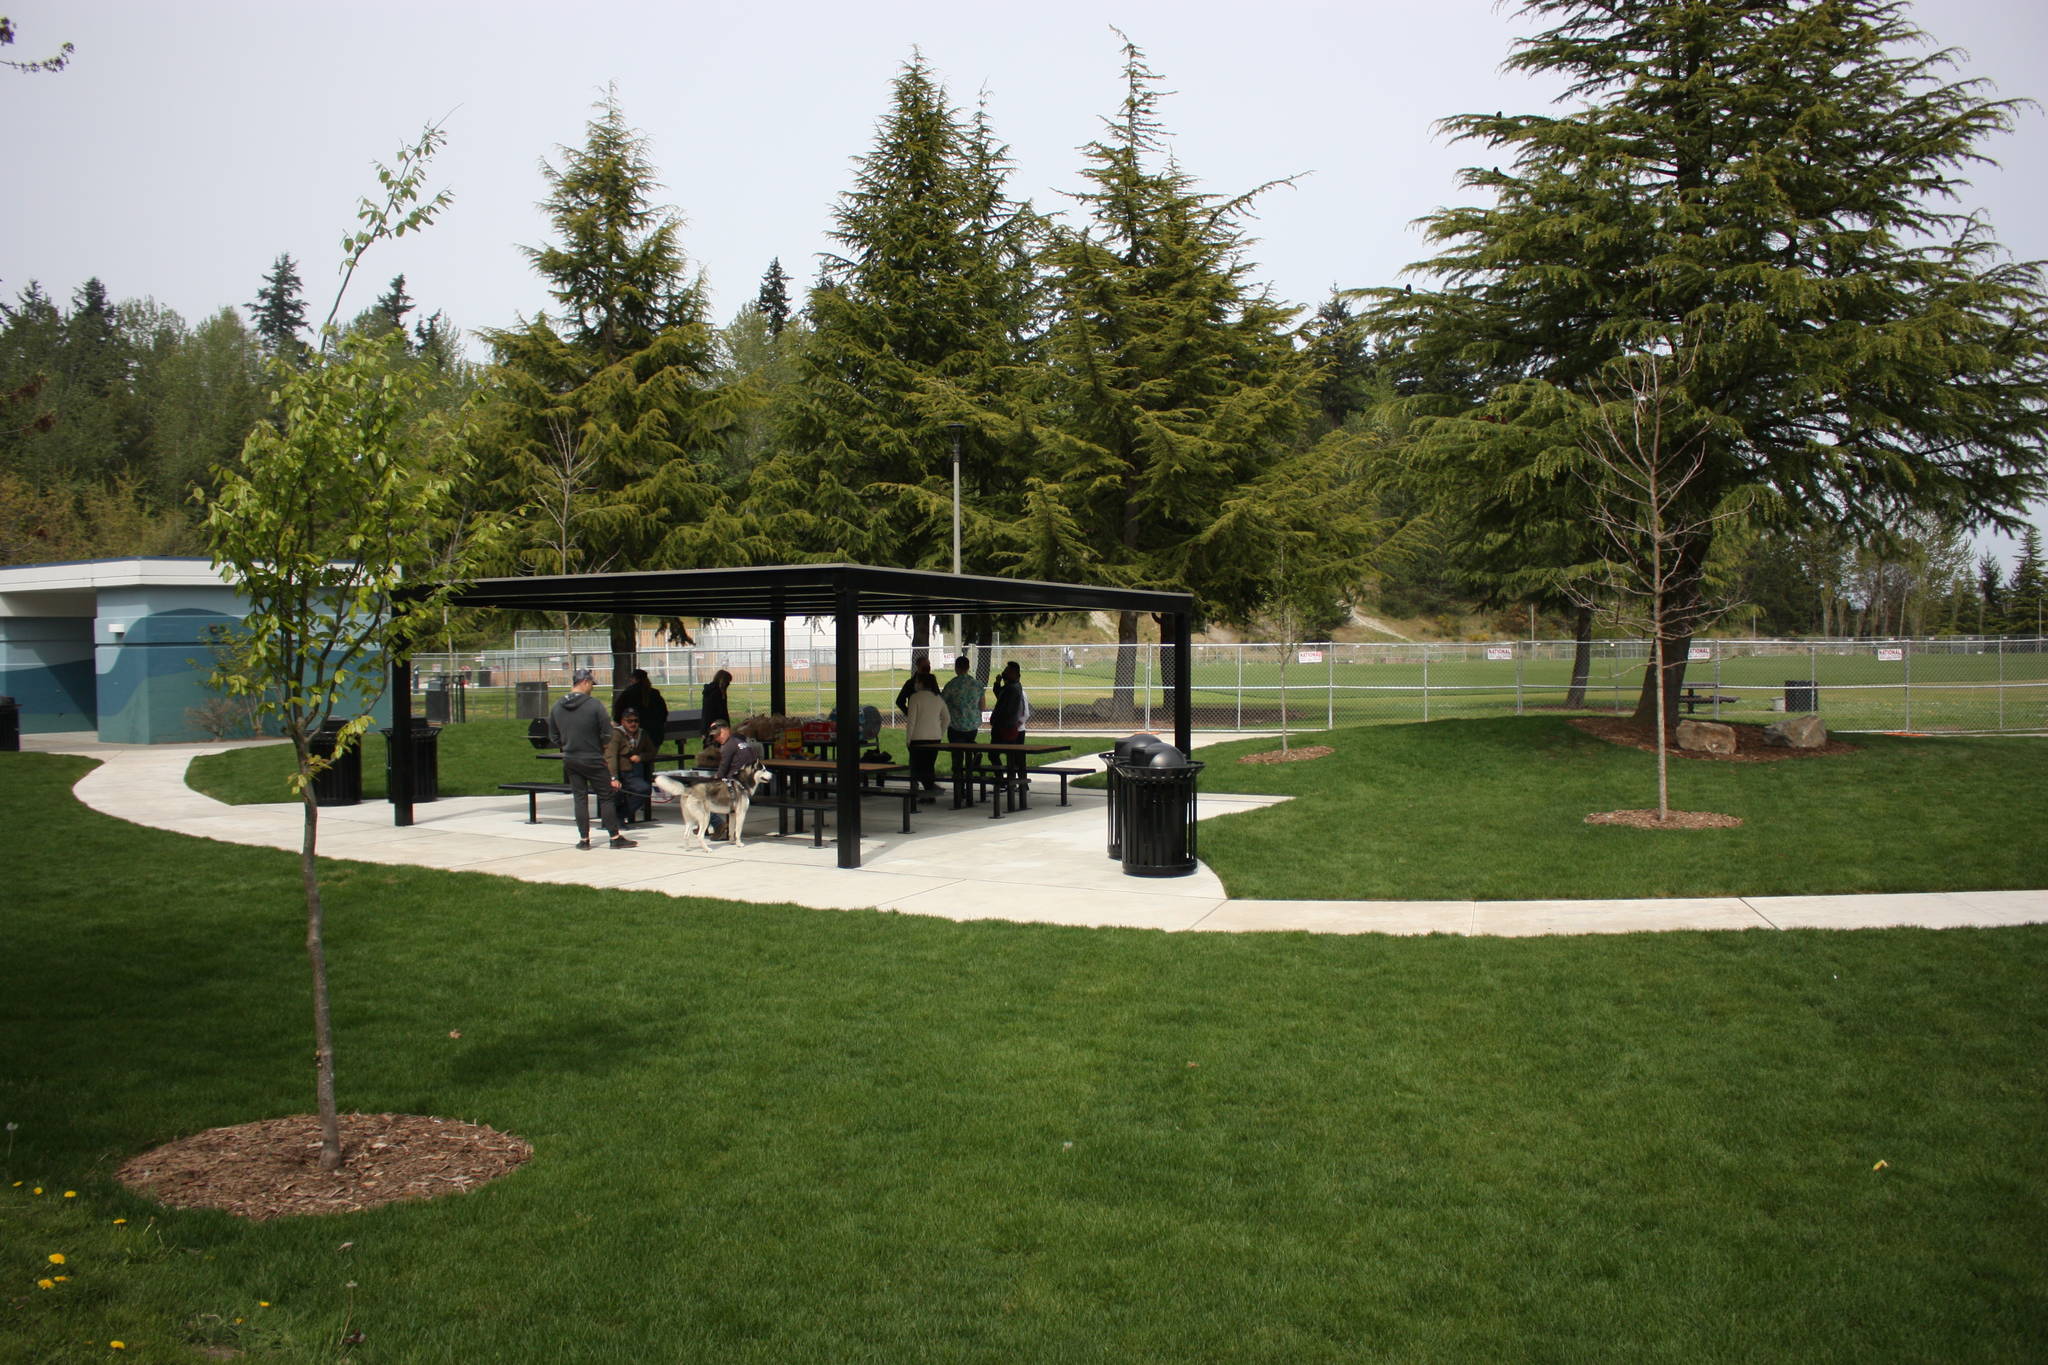 Locals host a barbecue using the park's new sheltered picnic area. CAMERON SHEPPARD, Sound Publishing